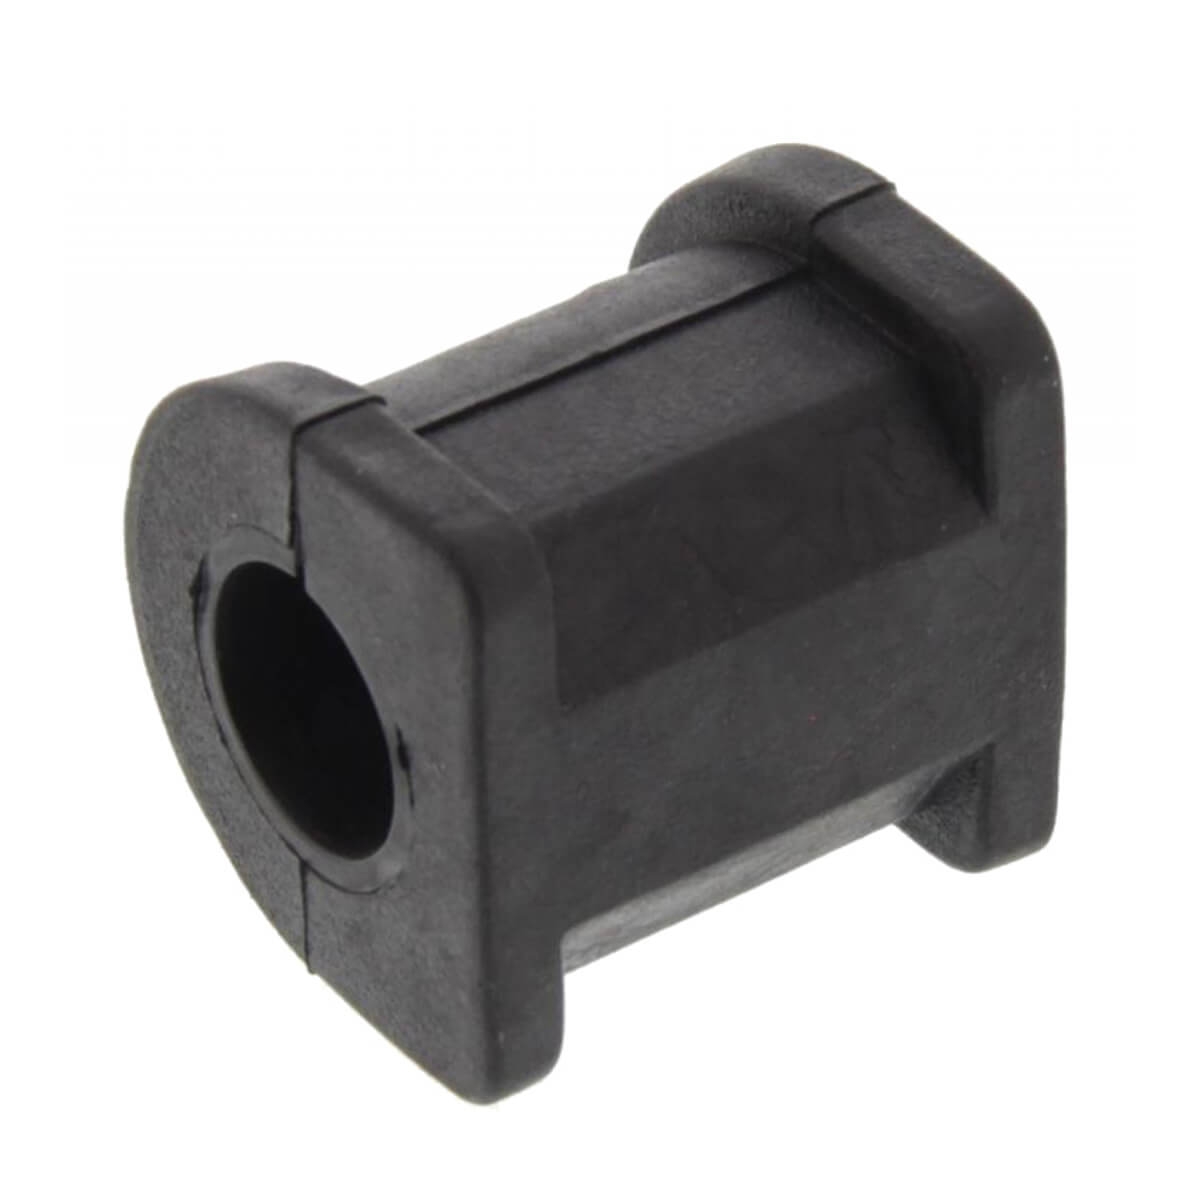 Stabilizer Coupling Mount